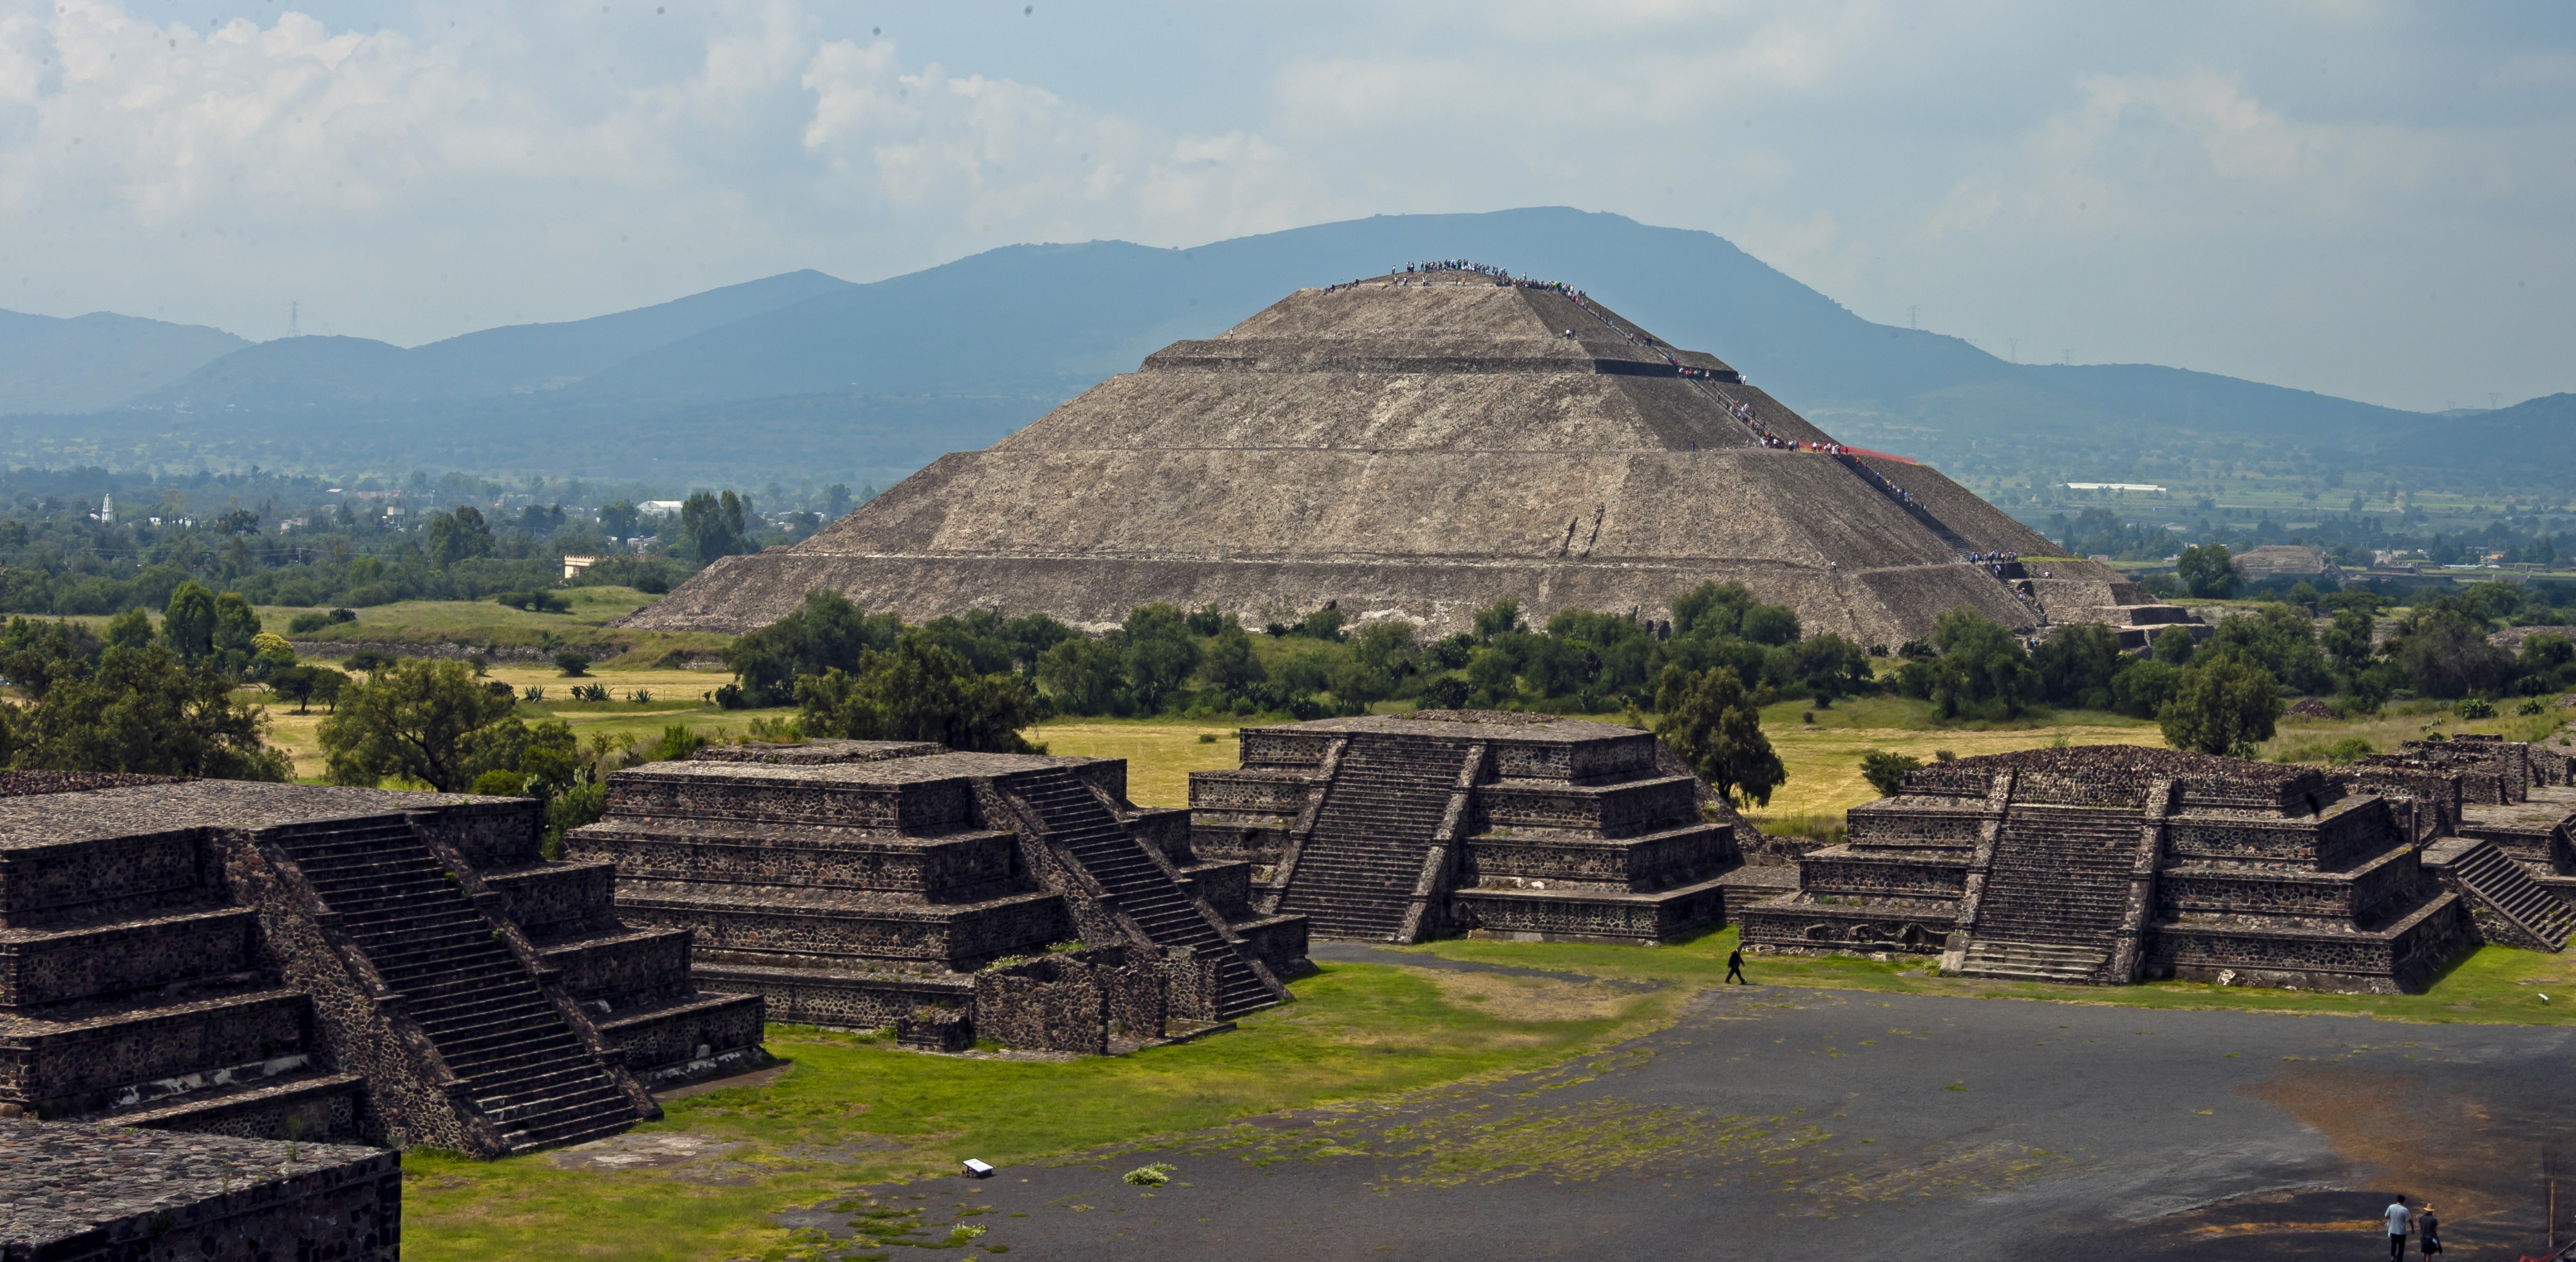 Pyramid of the Sun from Pyramid of the Moon, Teotihuacan